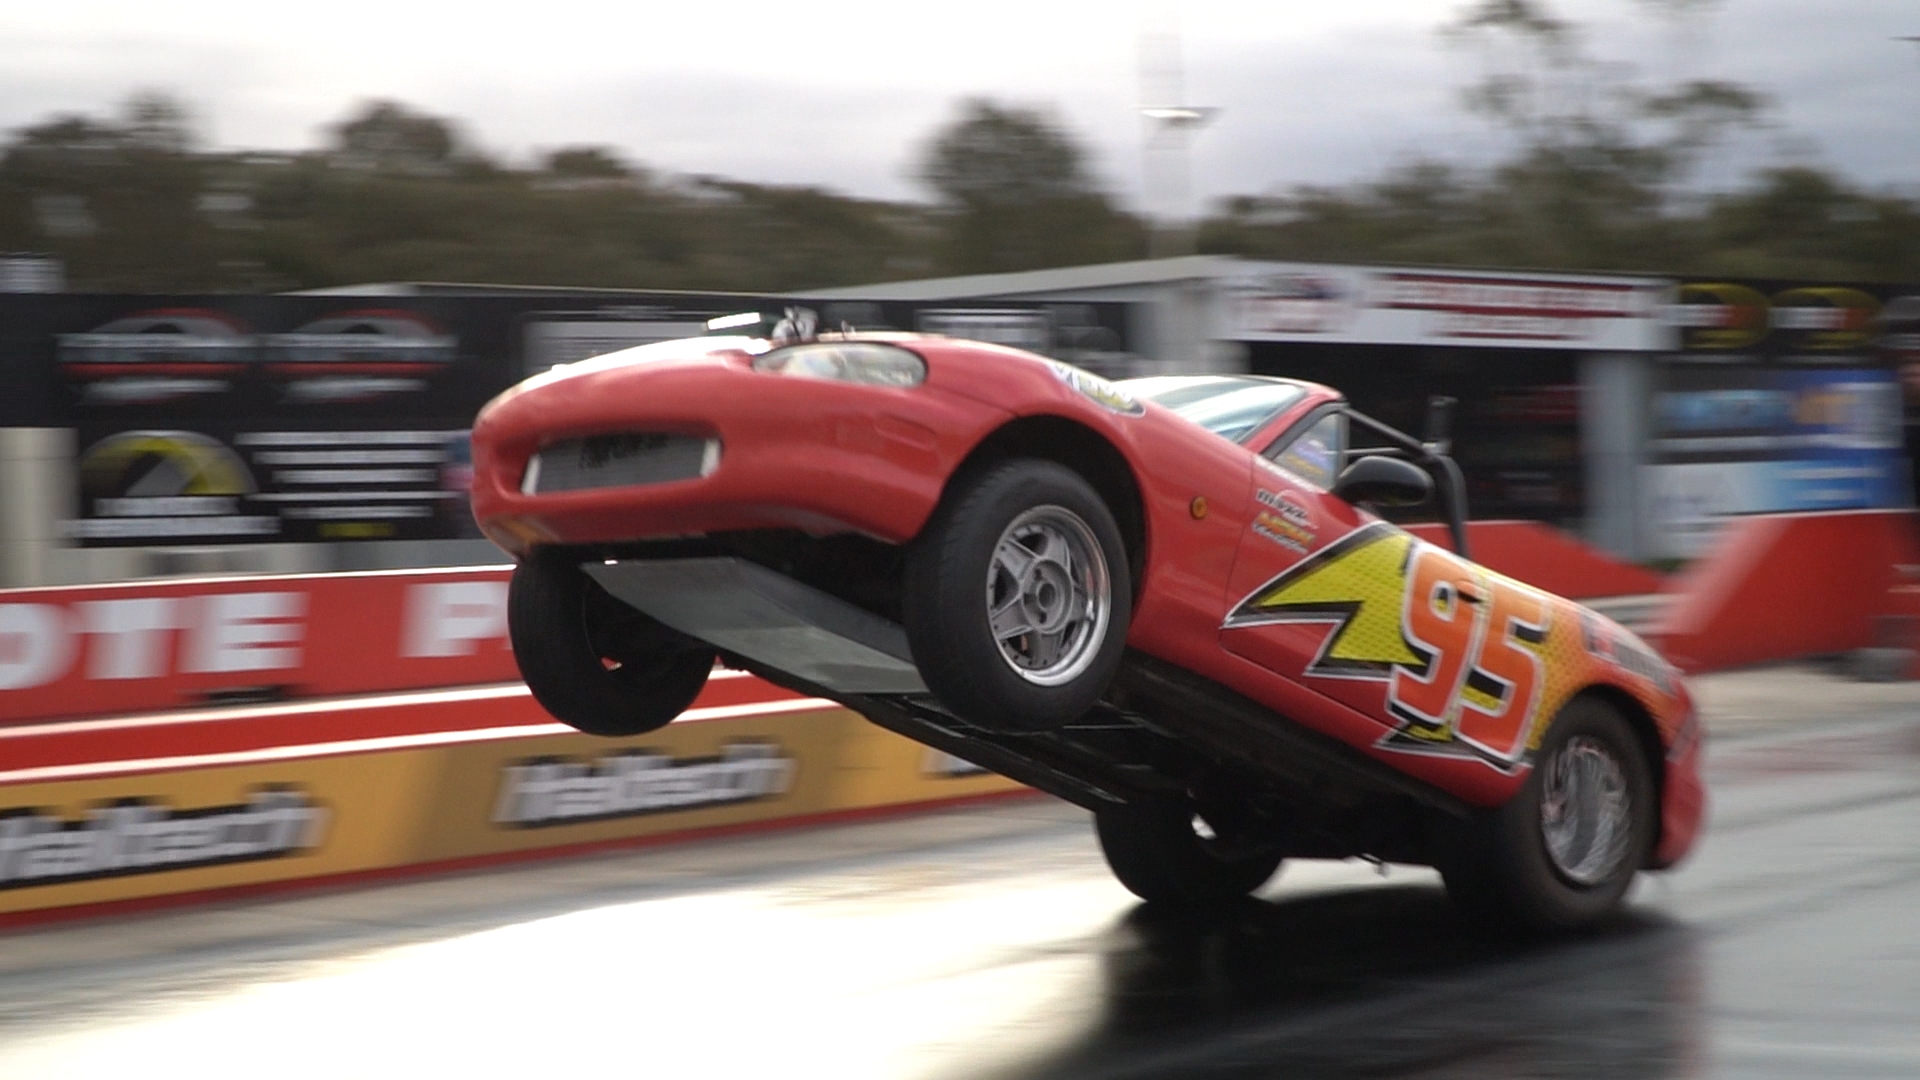 Video: The Barra MX-5 goes crazy-quick at the track!